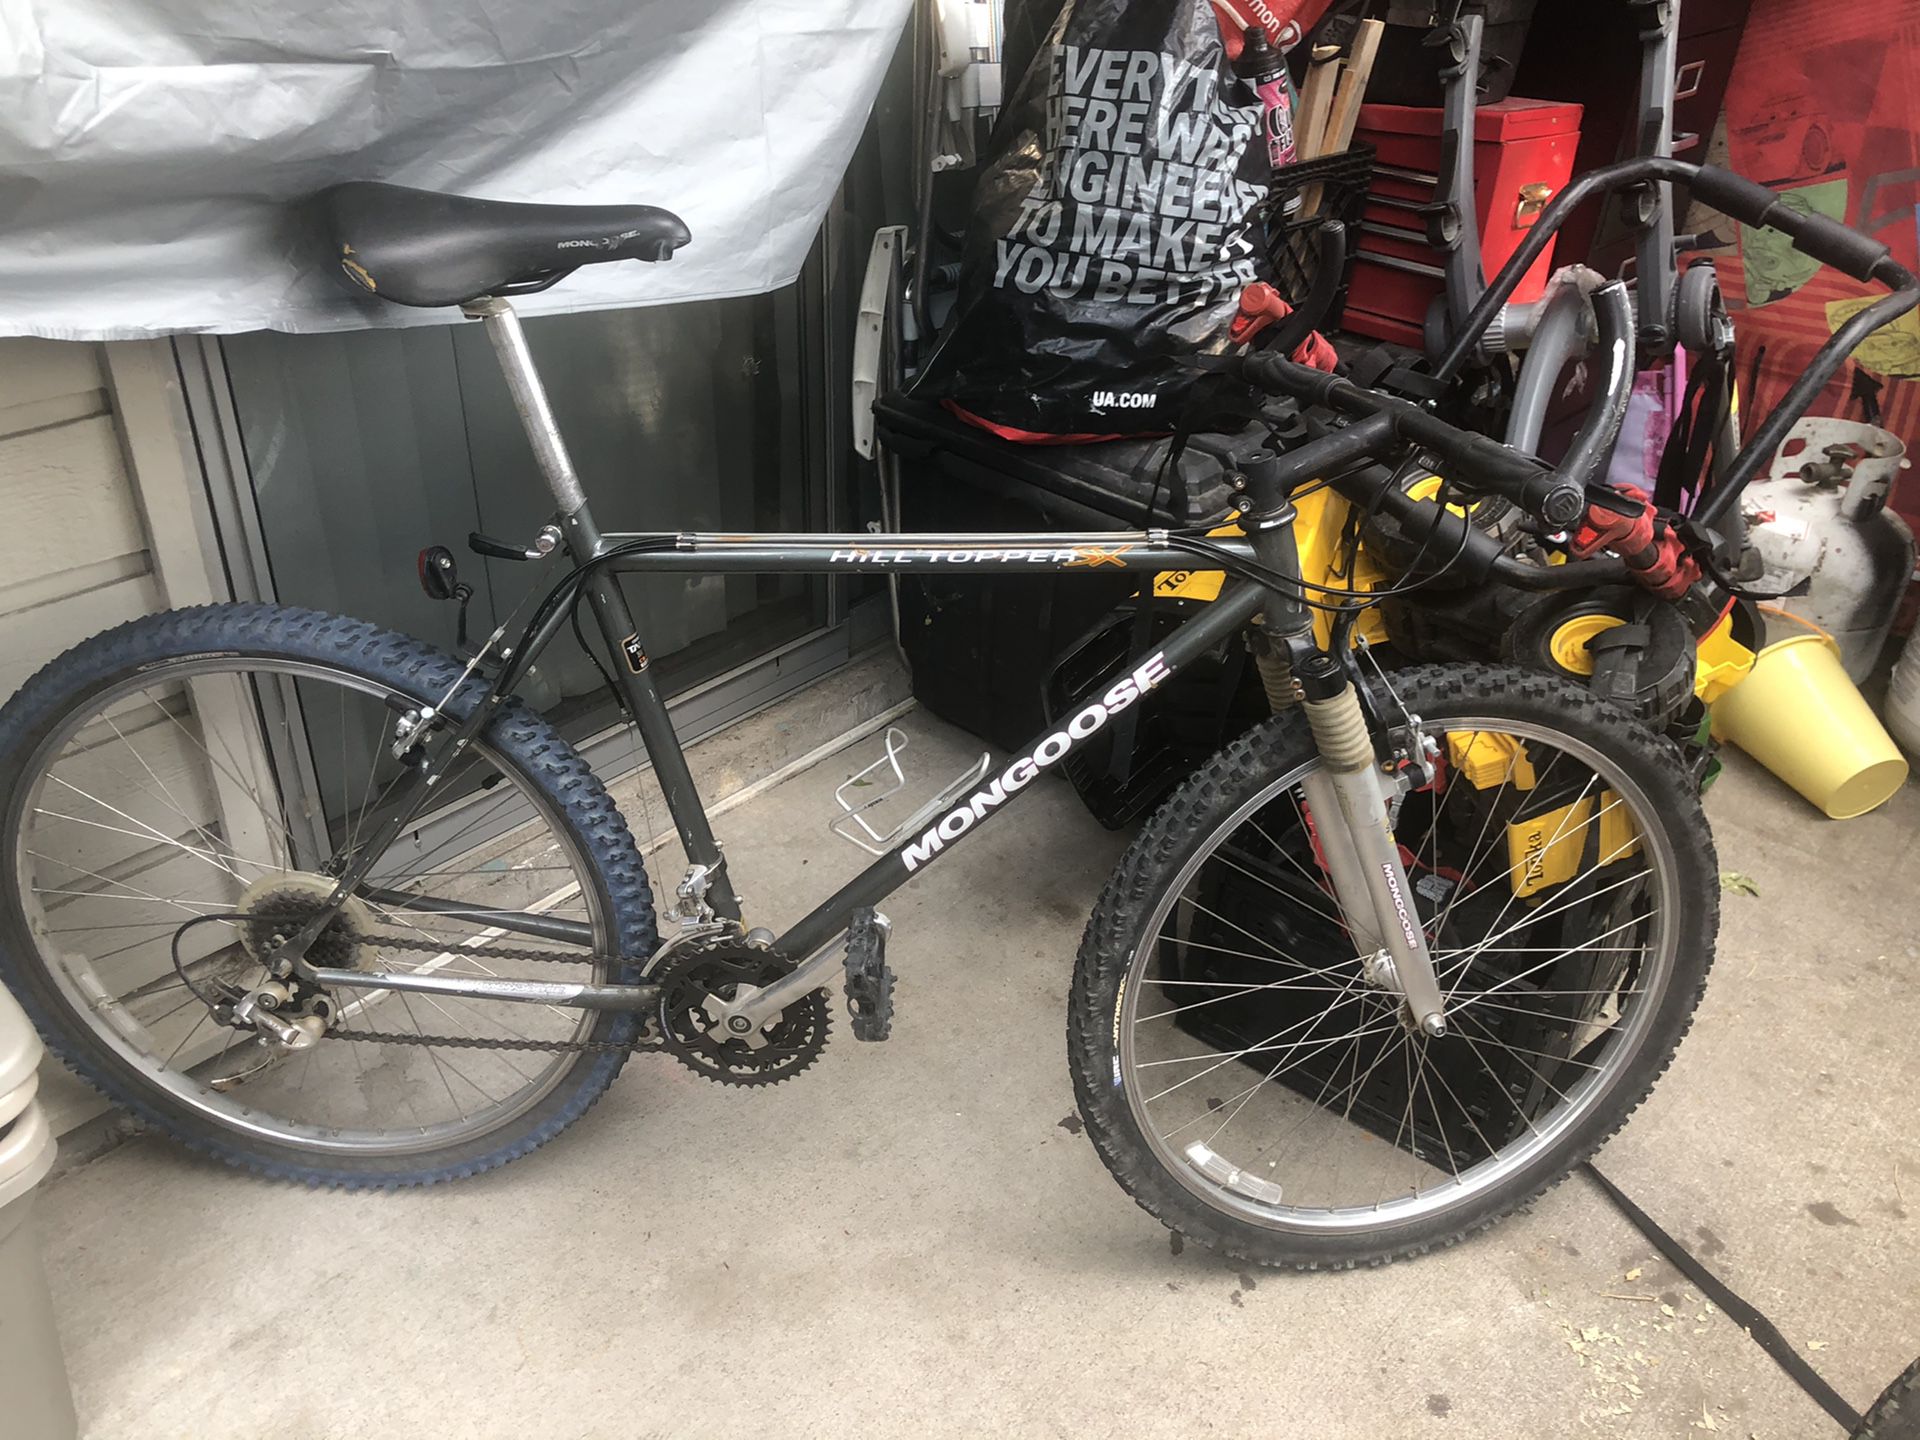 Bicycle good condition works great size 26 in